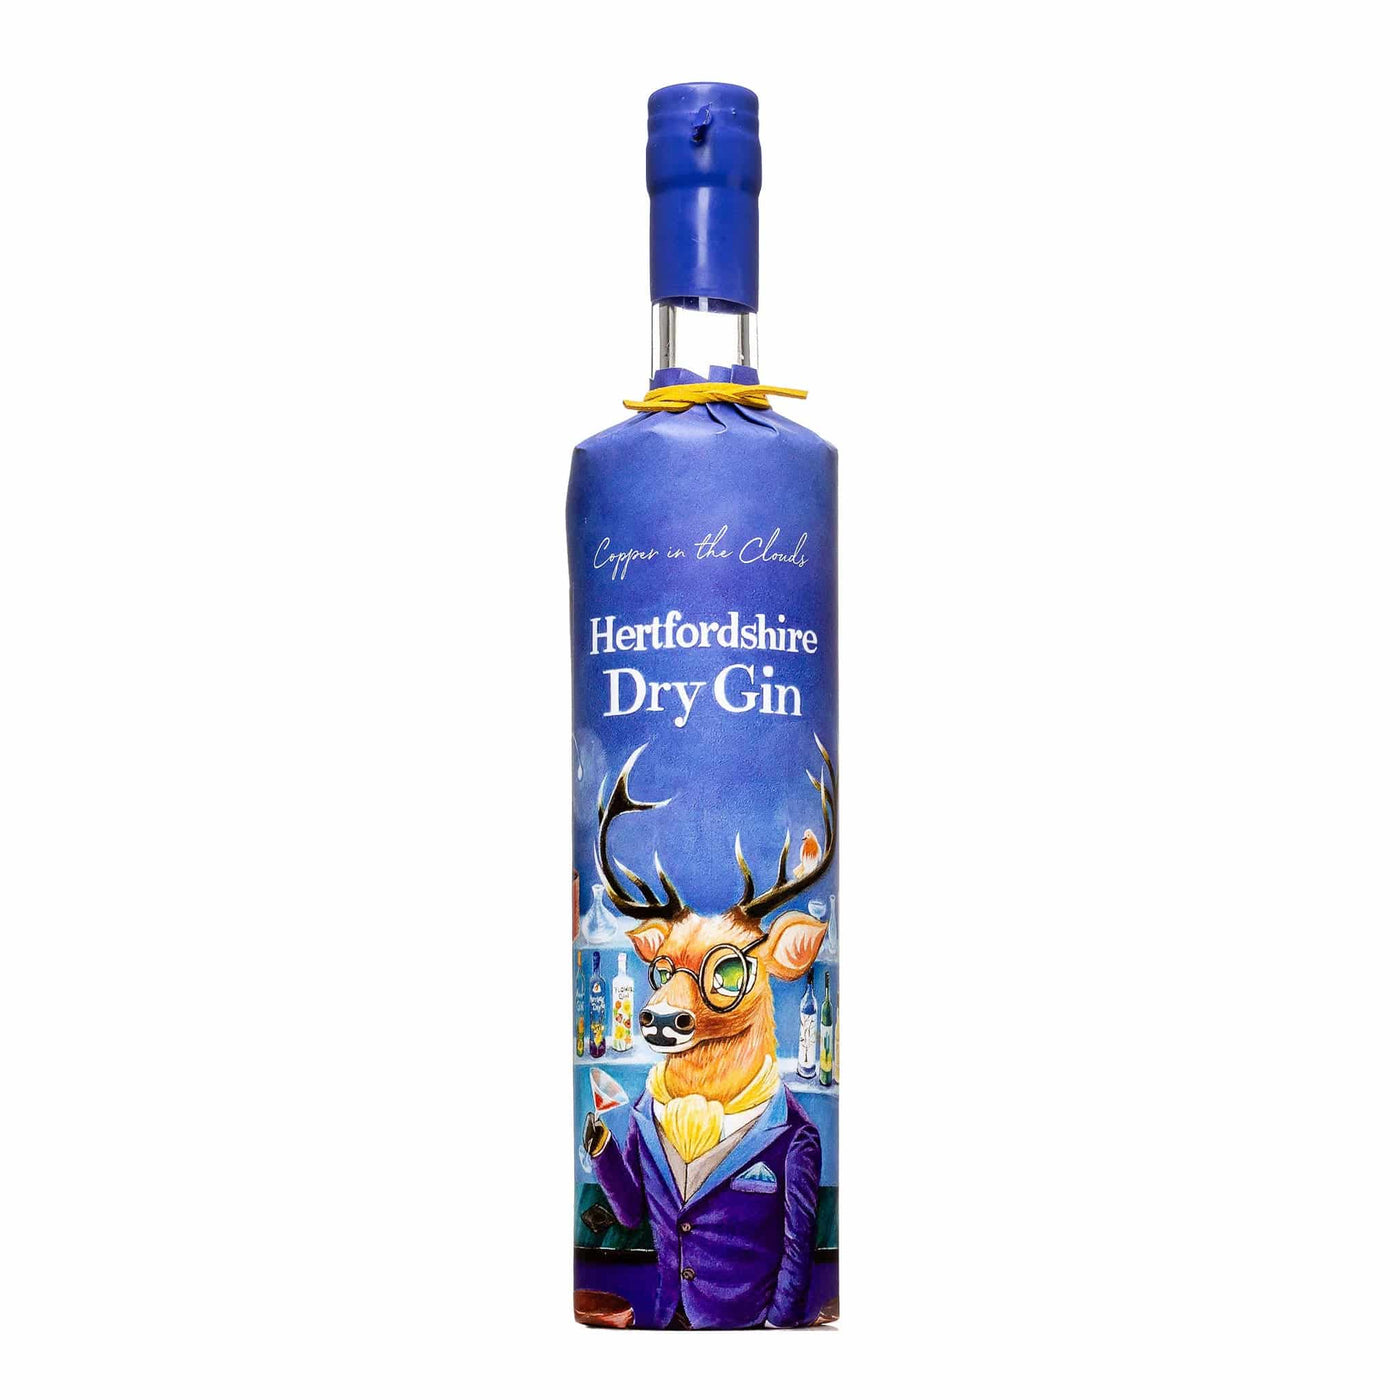 The Copper In The Clouds Hertfordshire Dry Gin - Spiritly